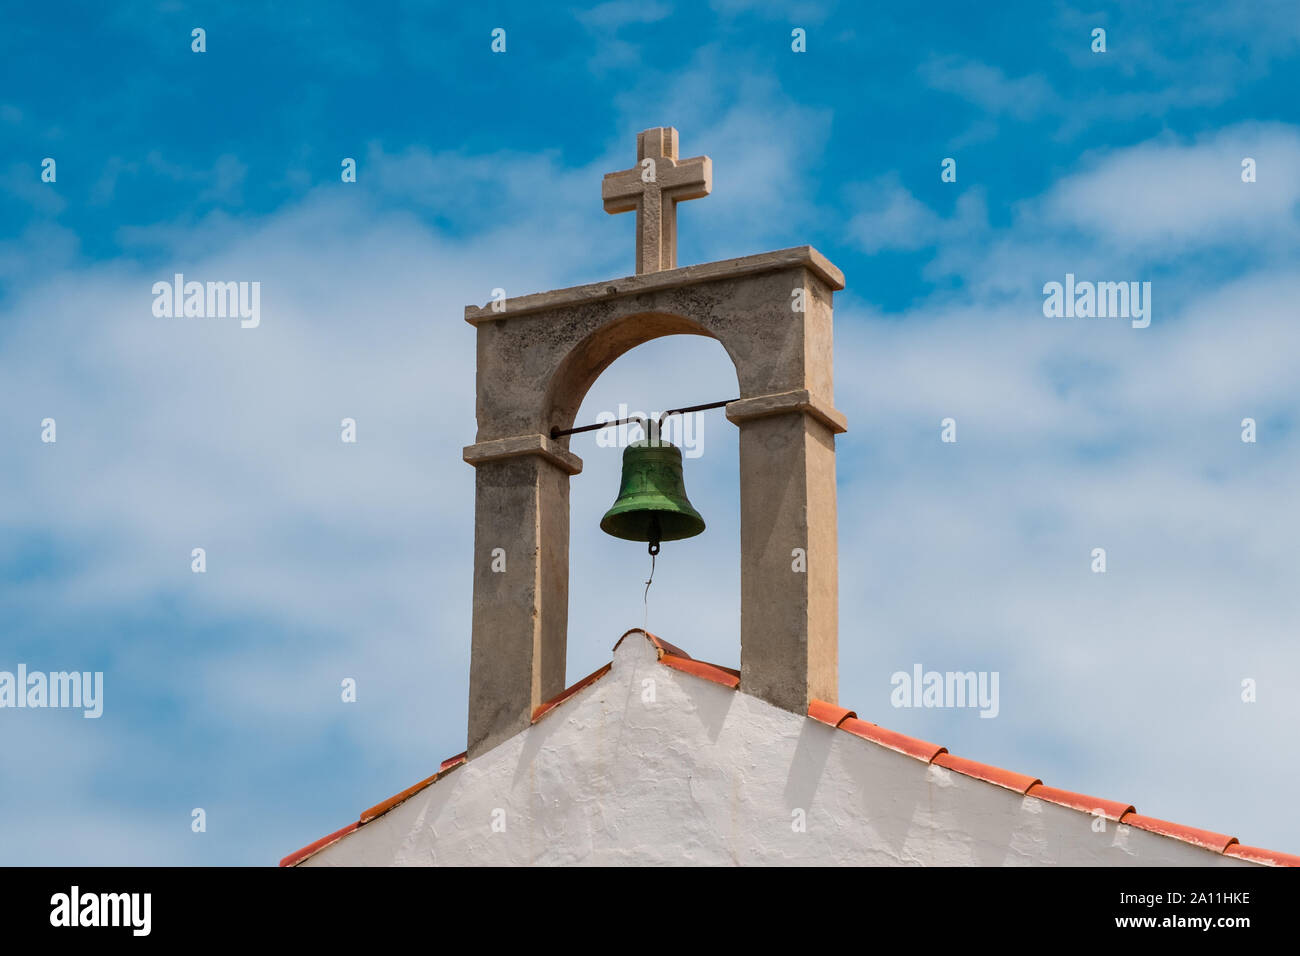 church bell and cross on rural church roof Stock Photo